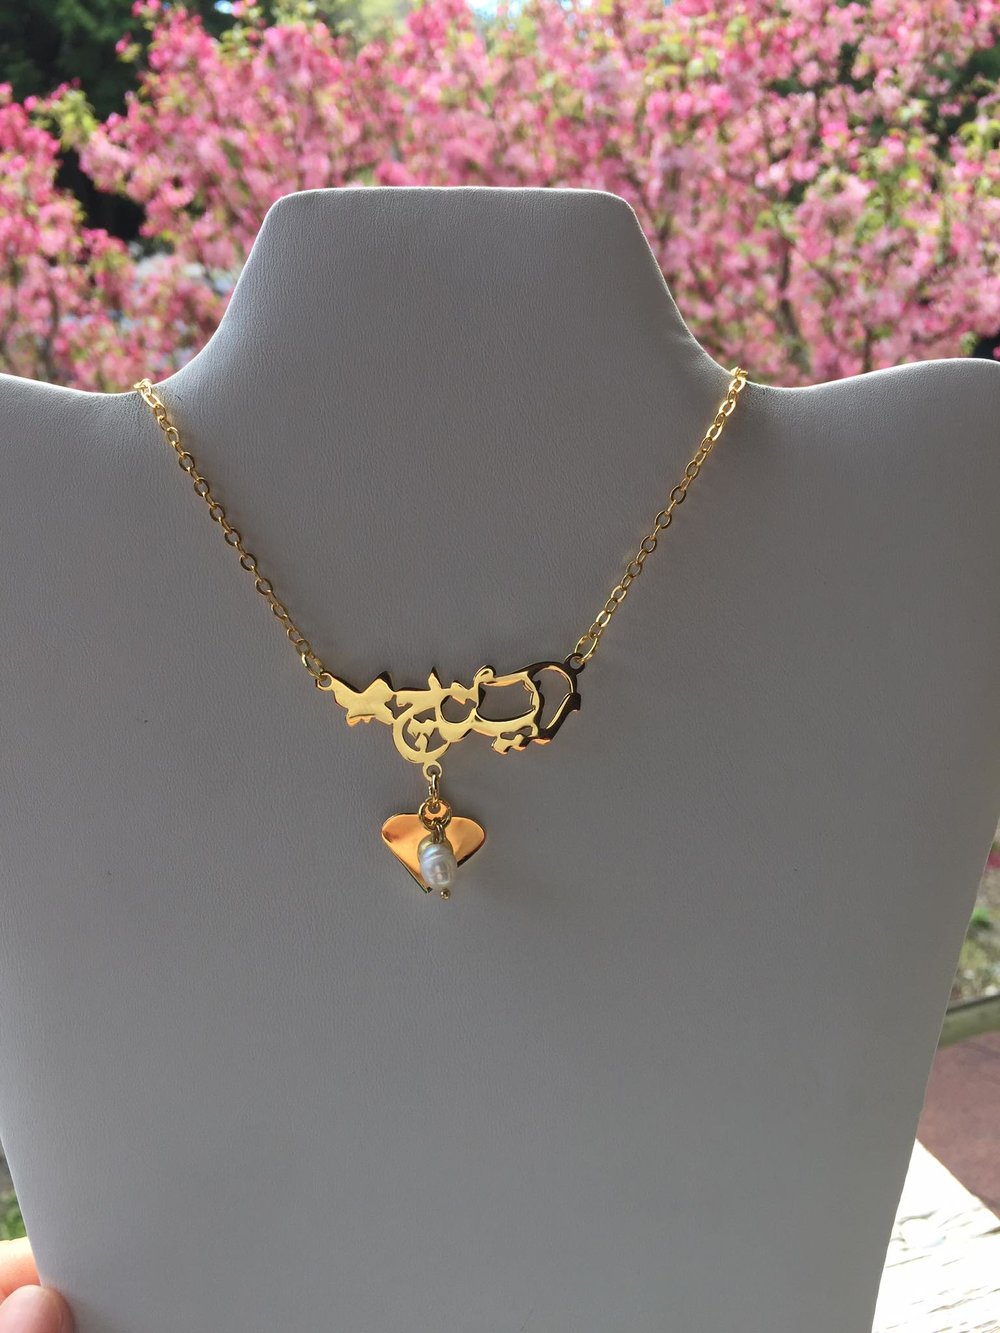 Name Necklace - Butterfly heart/pearl